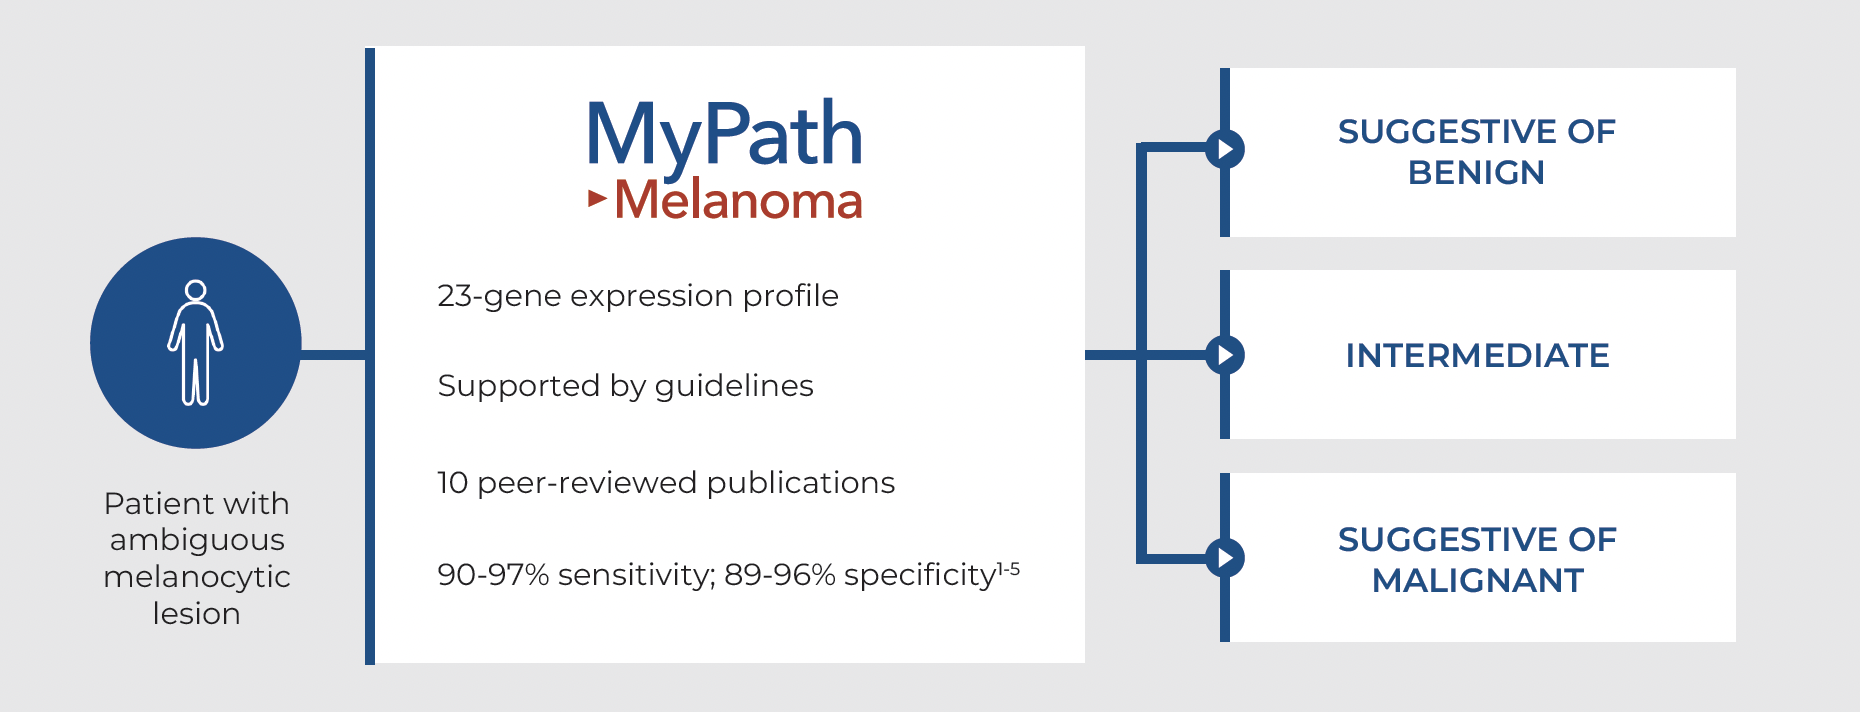 MyPath Melanoma suggests whether an ambiguous lesion is benign, malignant or intermediate. The 23-gene expression profile test has 90-97% sensitivity and 89-96% specificity, is supported by guidelines and has 10 peer reviewed publications.